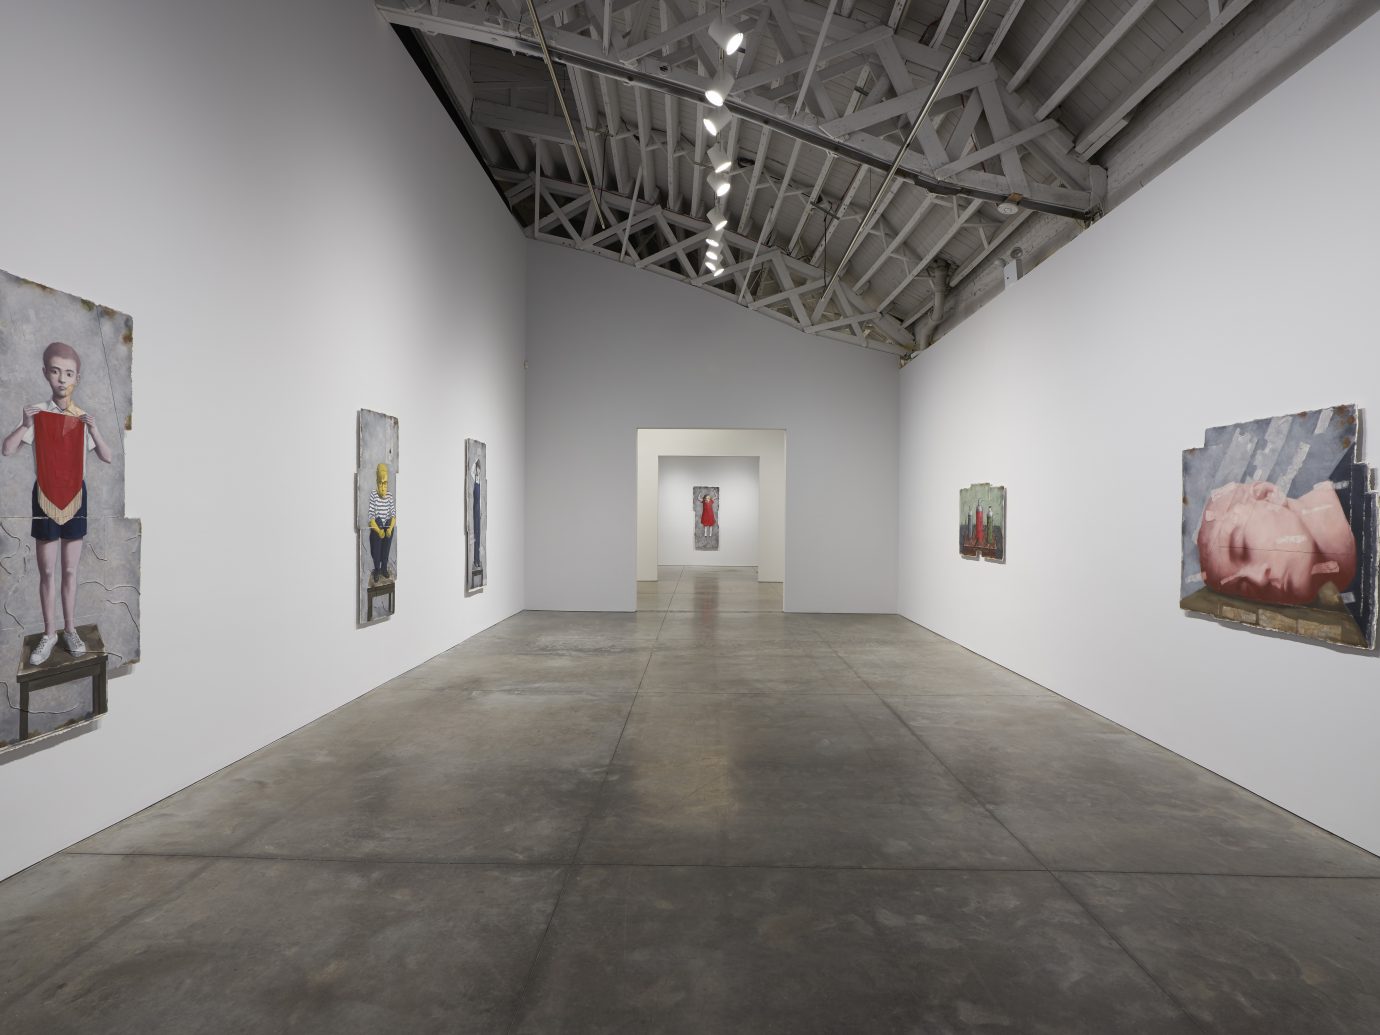 Installation view of Zhang Xiaogang: Recent Works which was up at Pace Gallery from September 7th - October 20th, 2018